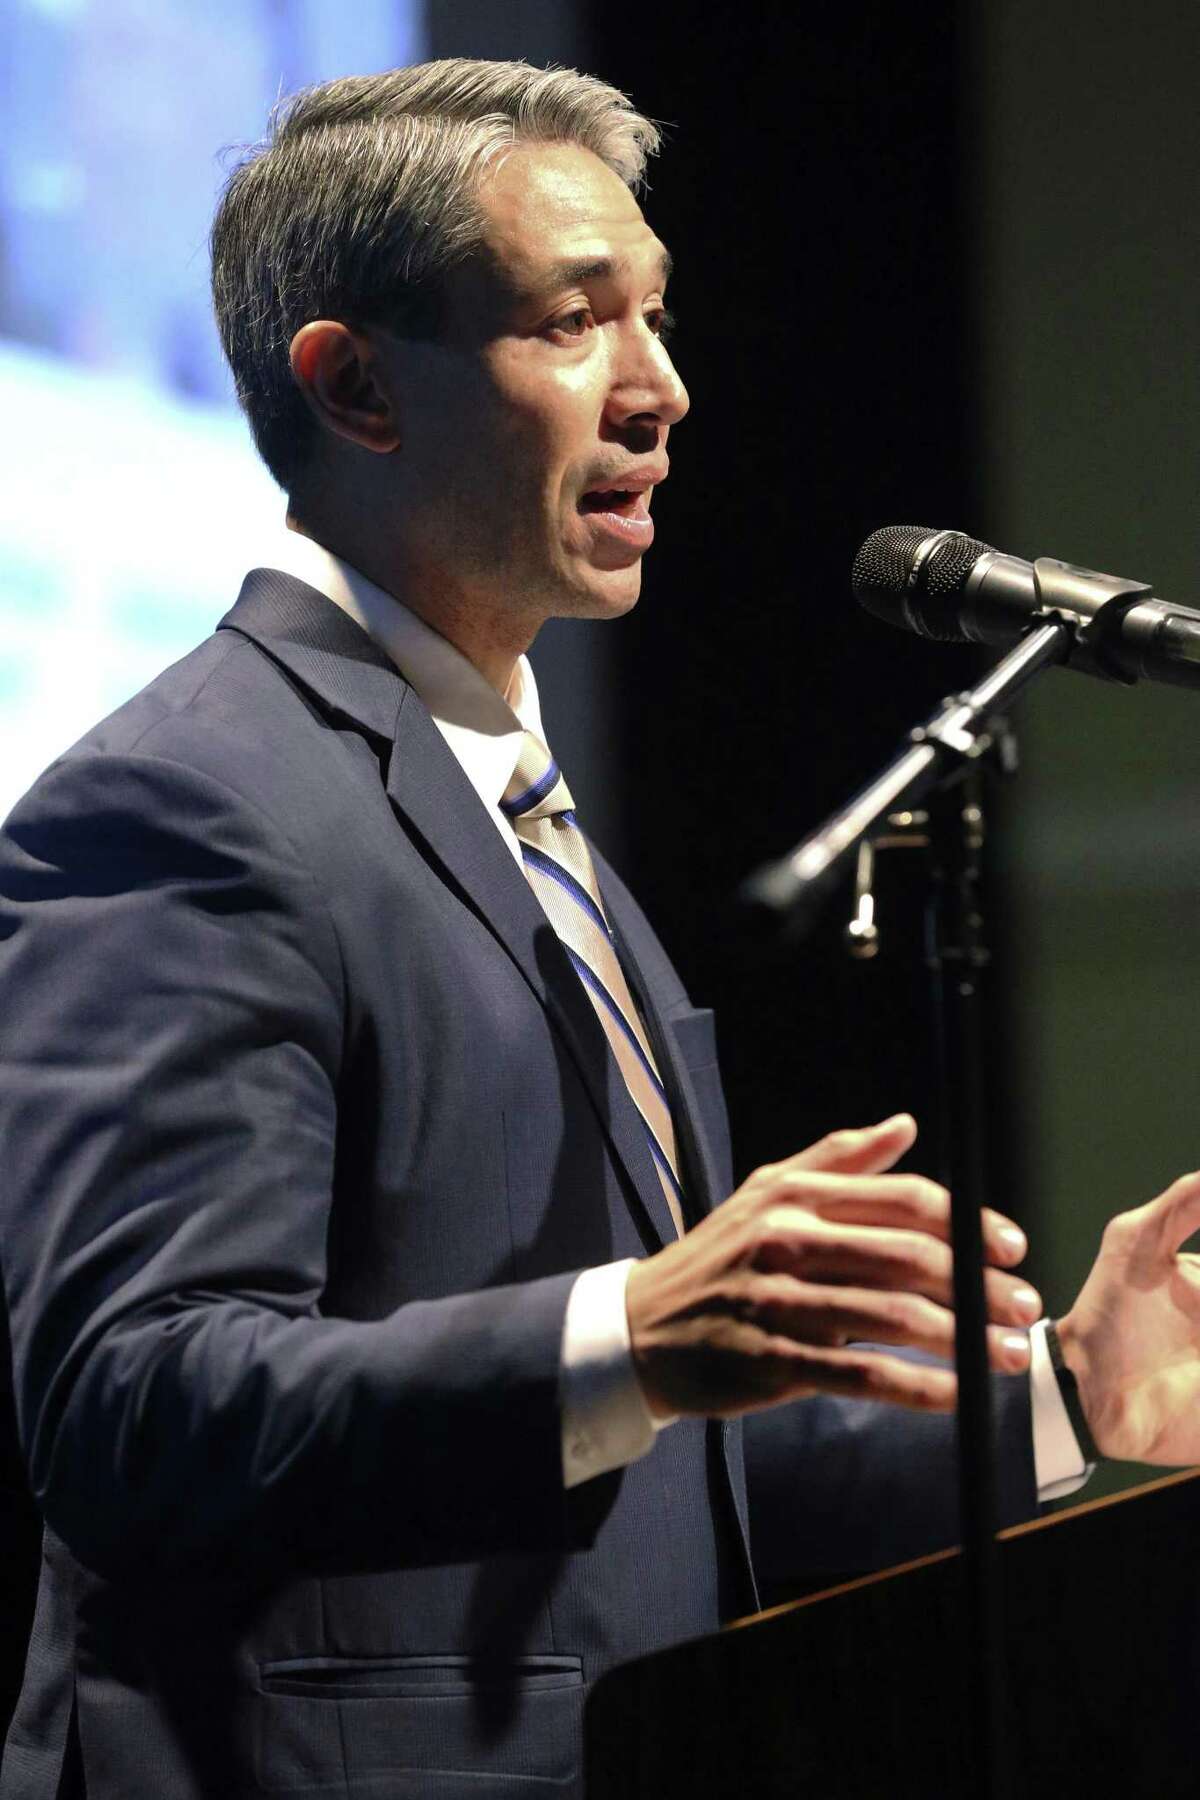 Mayor Ron Nirenberg has a few words before keynote speaker Katharine Hayhoe talks in front of an audience at Buena Vista Theater at UTSA's Downtown Campus on December 7, 2017